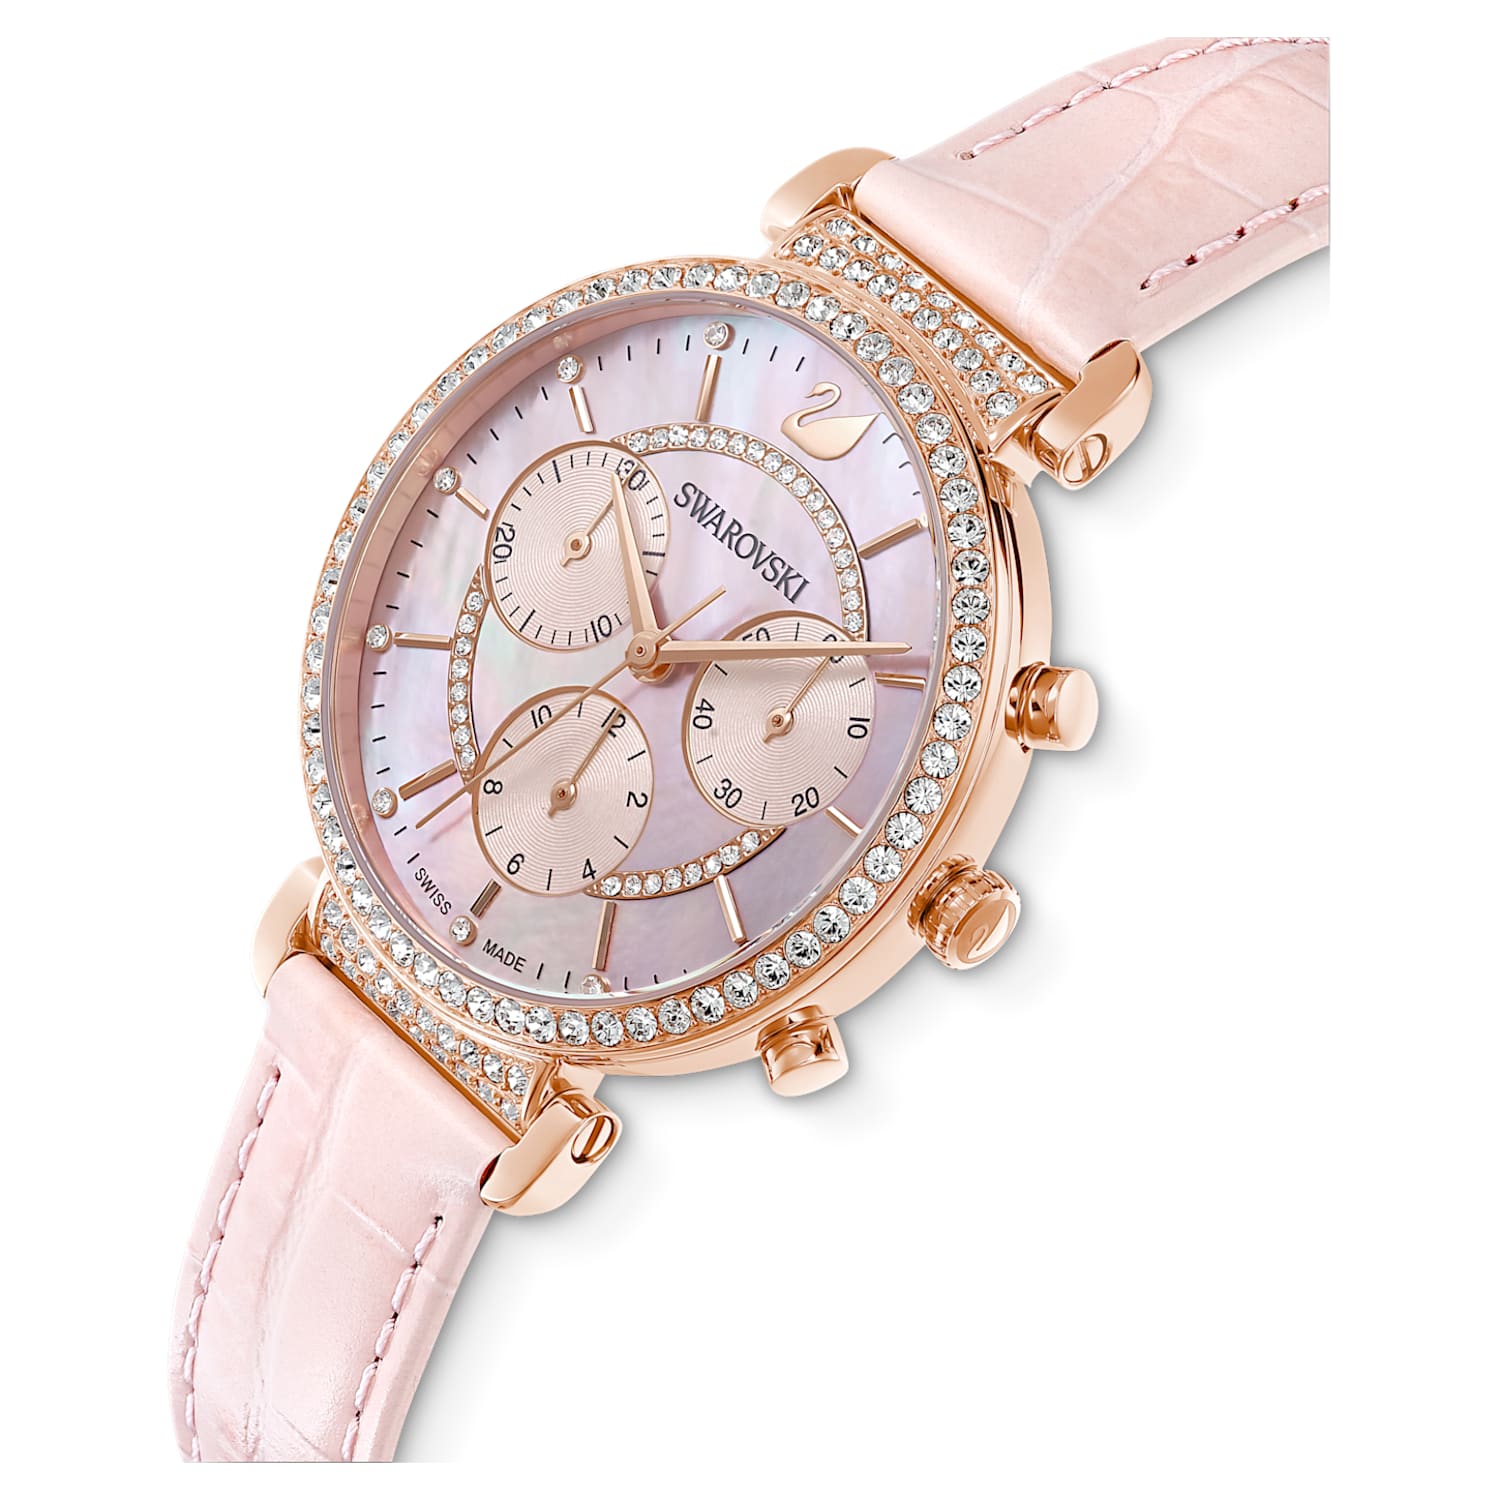 Passage Chrono watch, Swiss Made, Leather strap, Pink, Rose gold